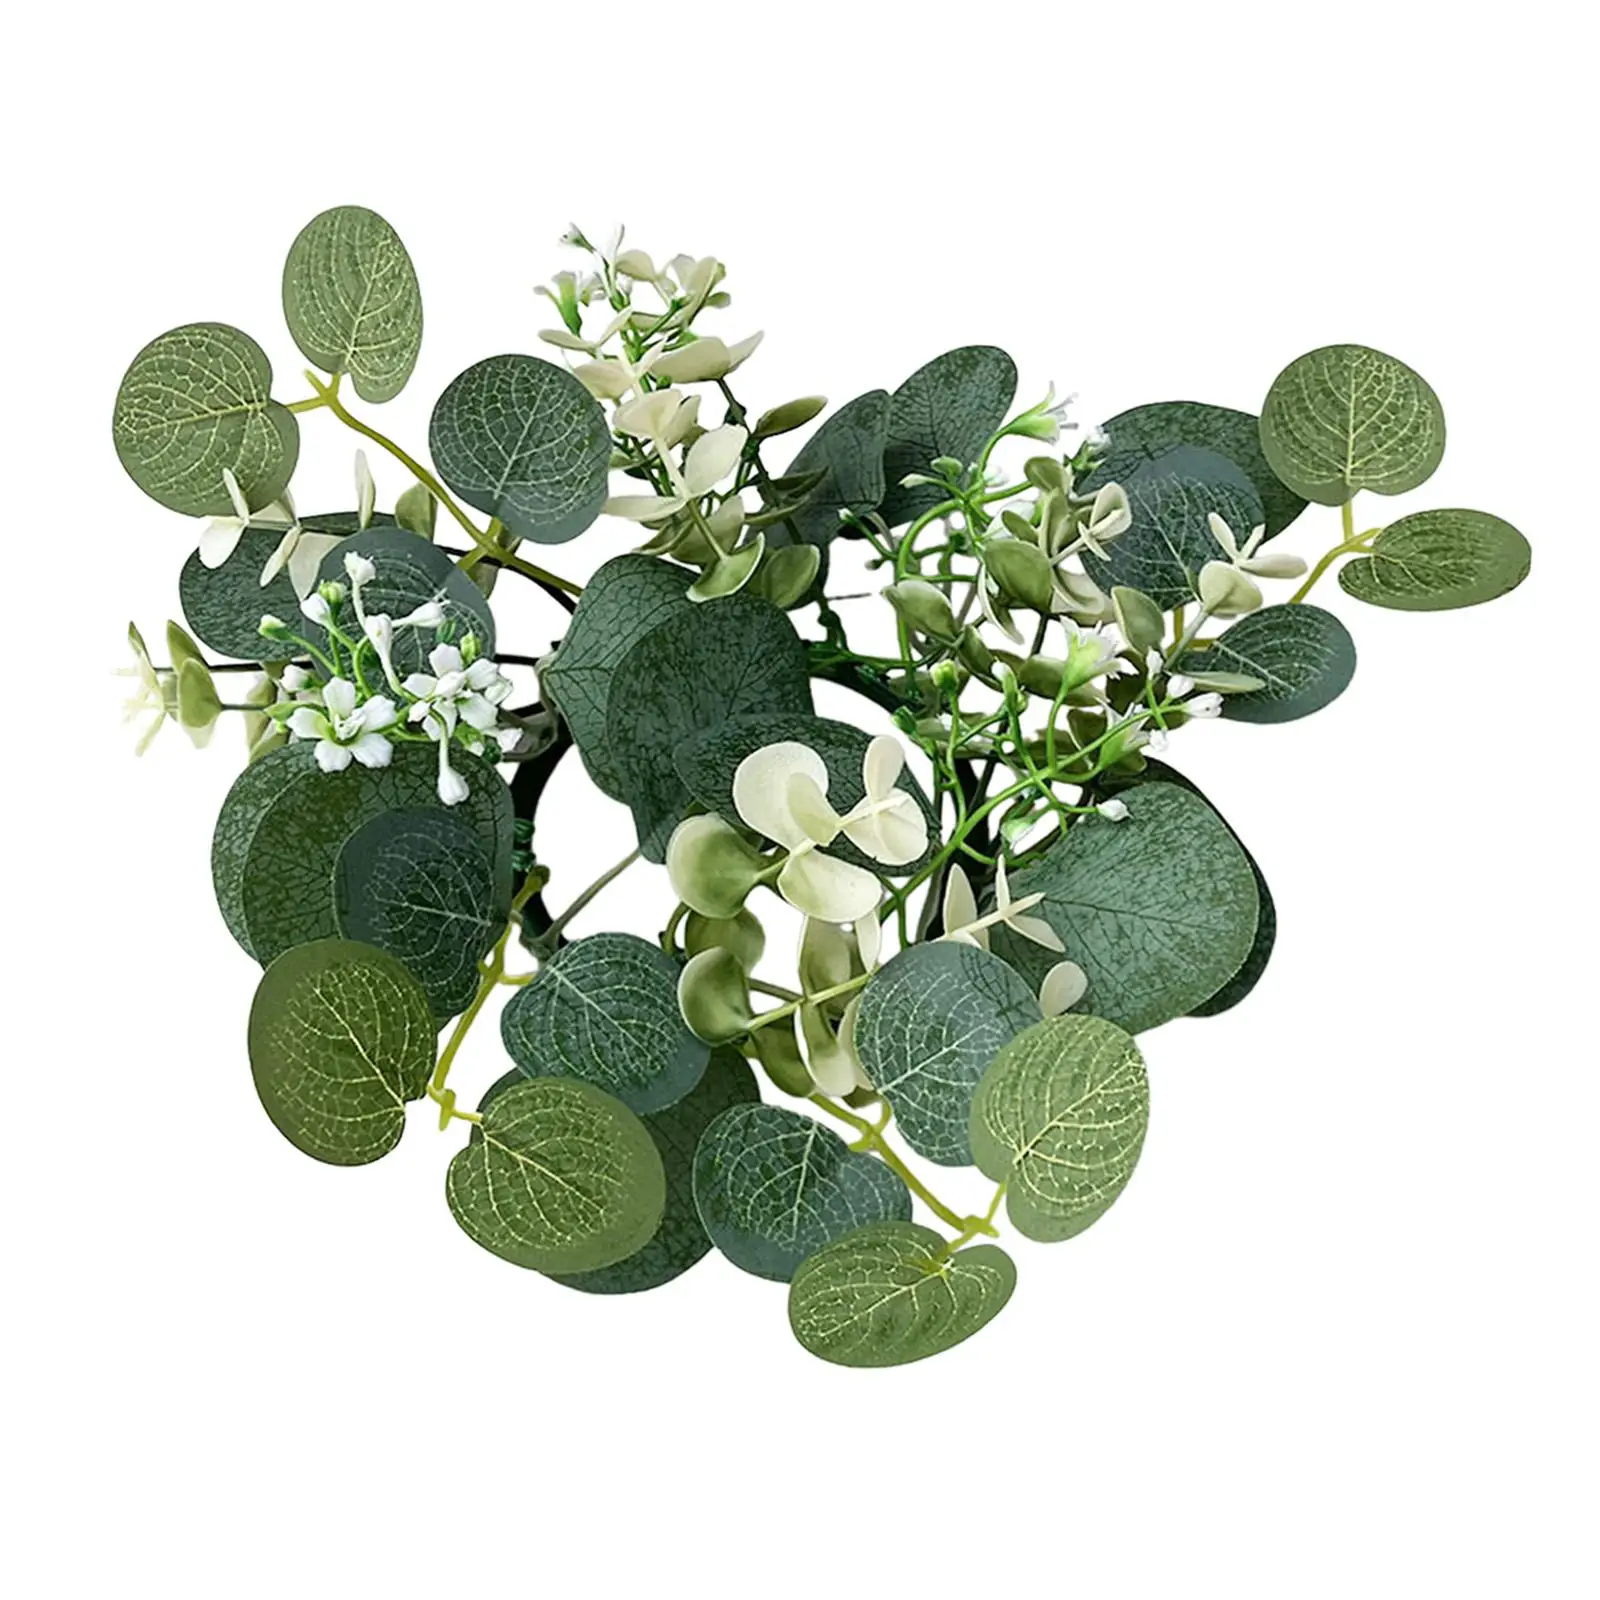 Artificial Eucalyptus Wreath Decoration 9.8inch Greenery Garland Rustic Candle Ring for Tabletop Easter Kitchen Dining Room Door